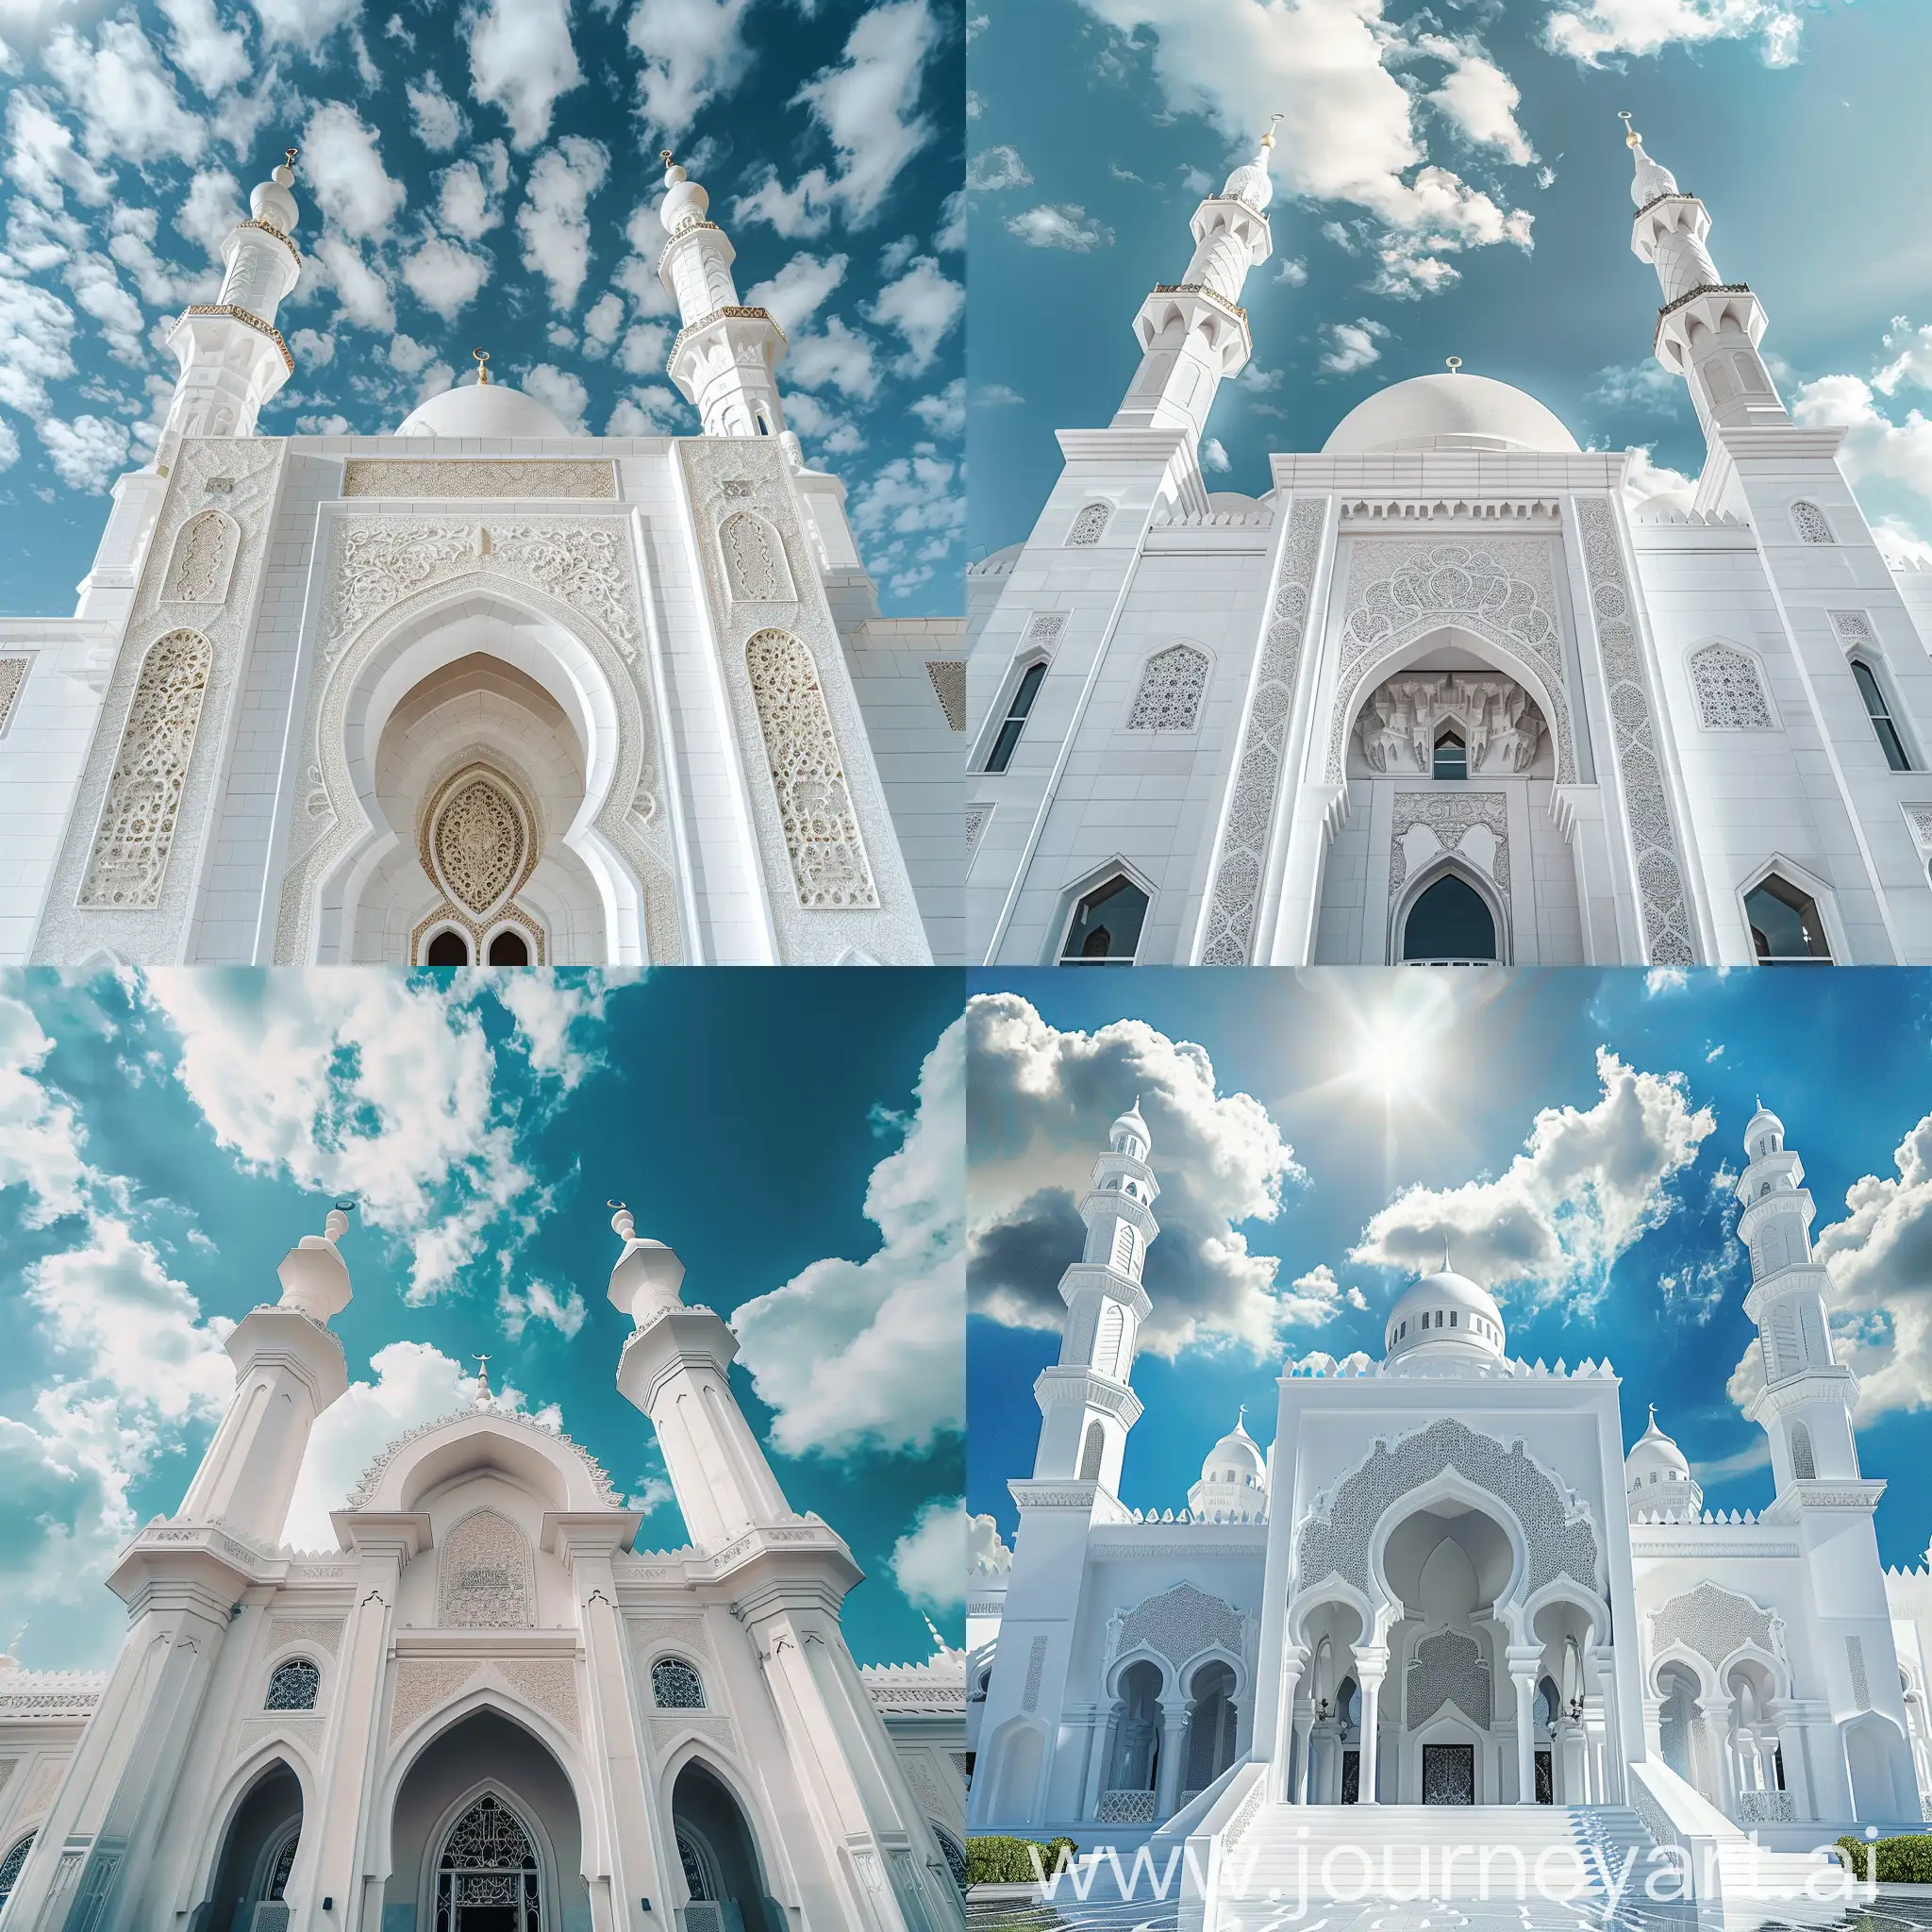 slightly tilted upside view of a traditional white mosque facade, Renaissance painting like sky and clouds above, 